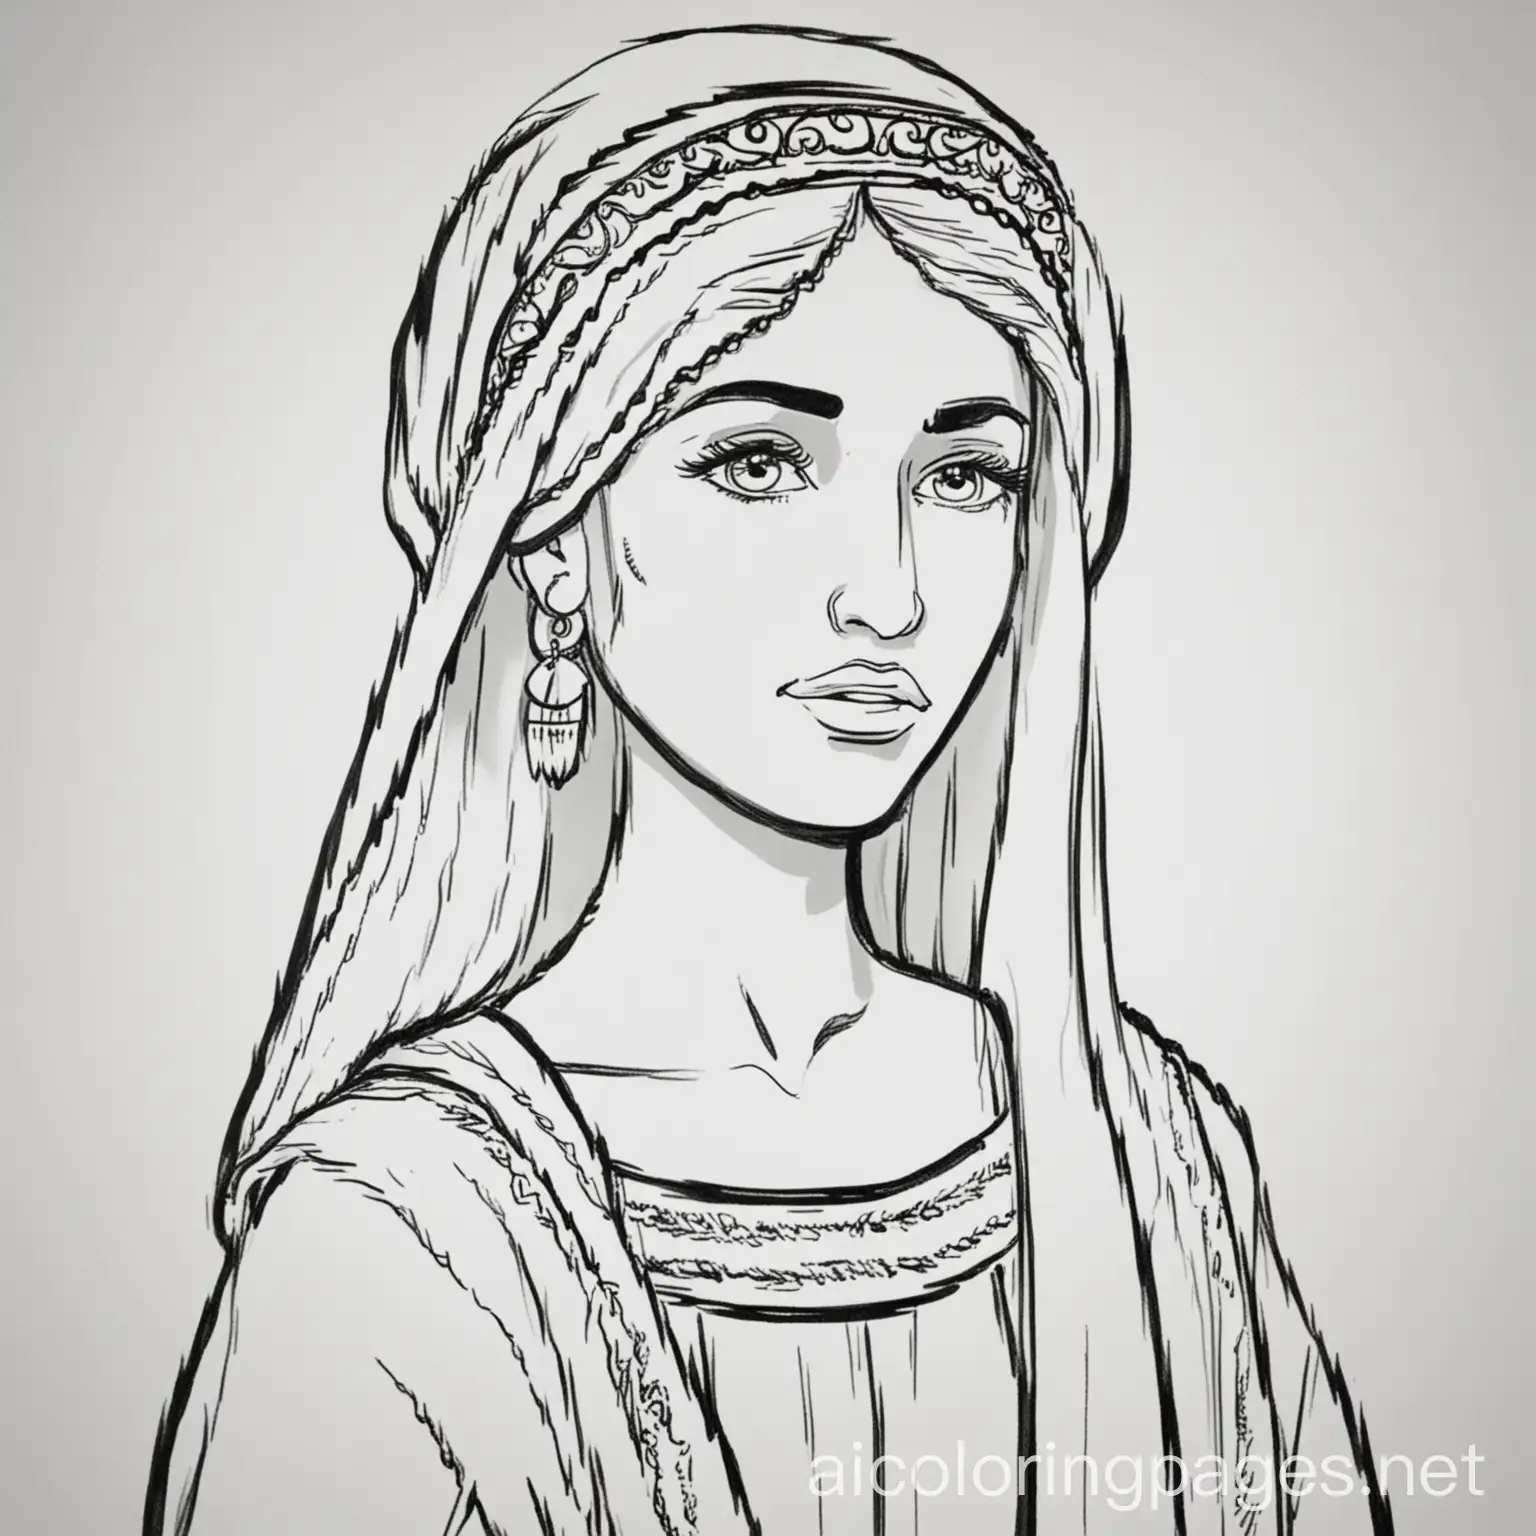 Rebekah wife of Isaac of the bible black and white coloring page, Coloring Page, black and white, line art, white background, Simplicity, Ample White Space. The background of the coloring page is plain white to make it easy for young children to color within the lines. The outlines of all the subjects are easy to distinguish, making it simple for kids to color without too much difficulty